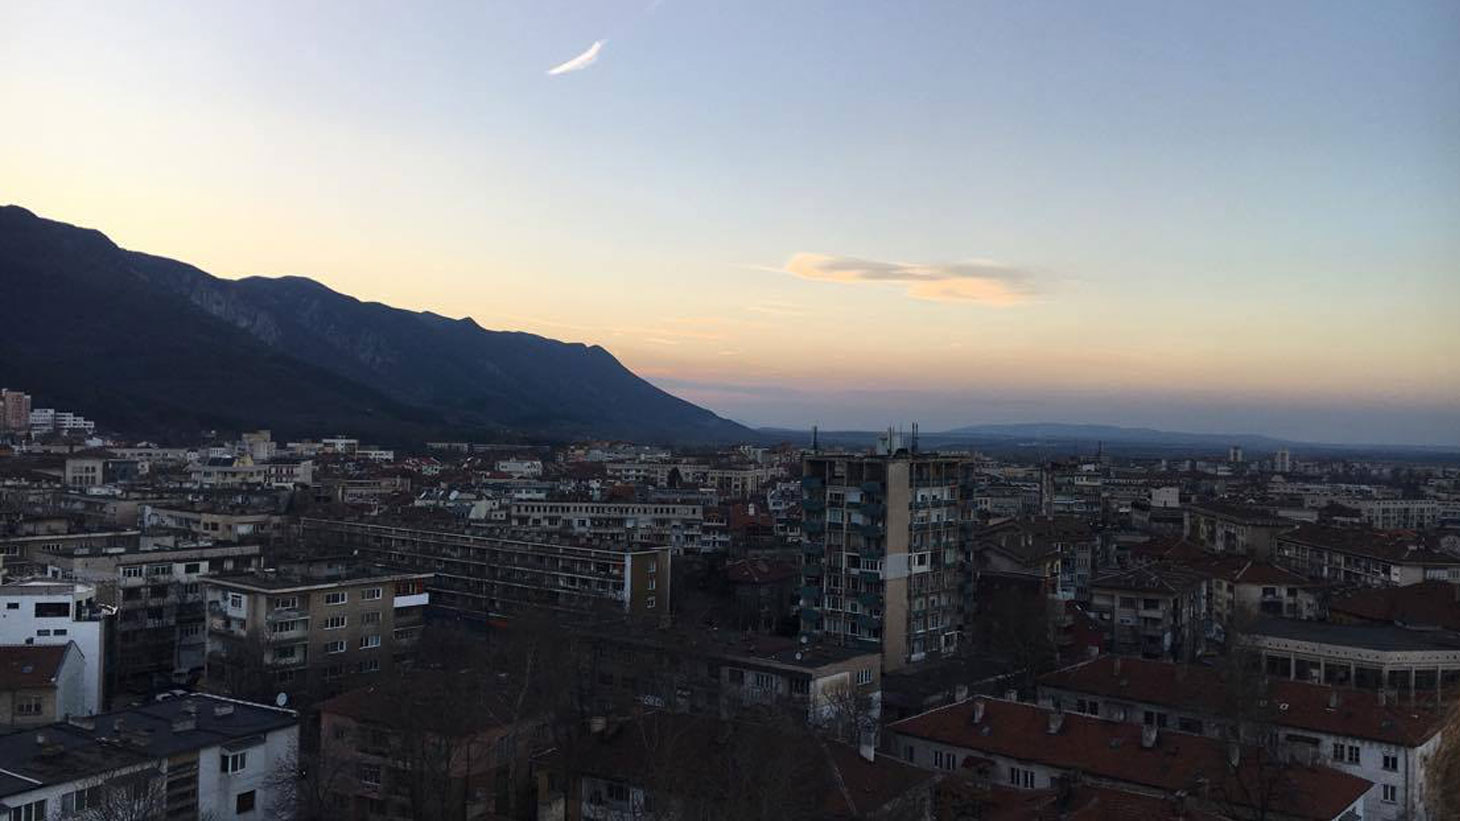 Student journal—My time in Bulgaria